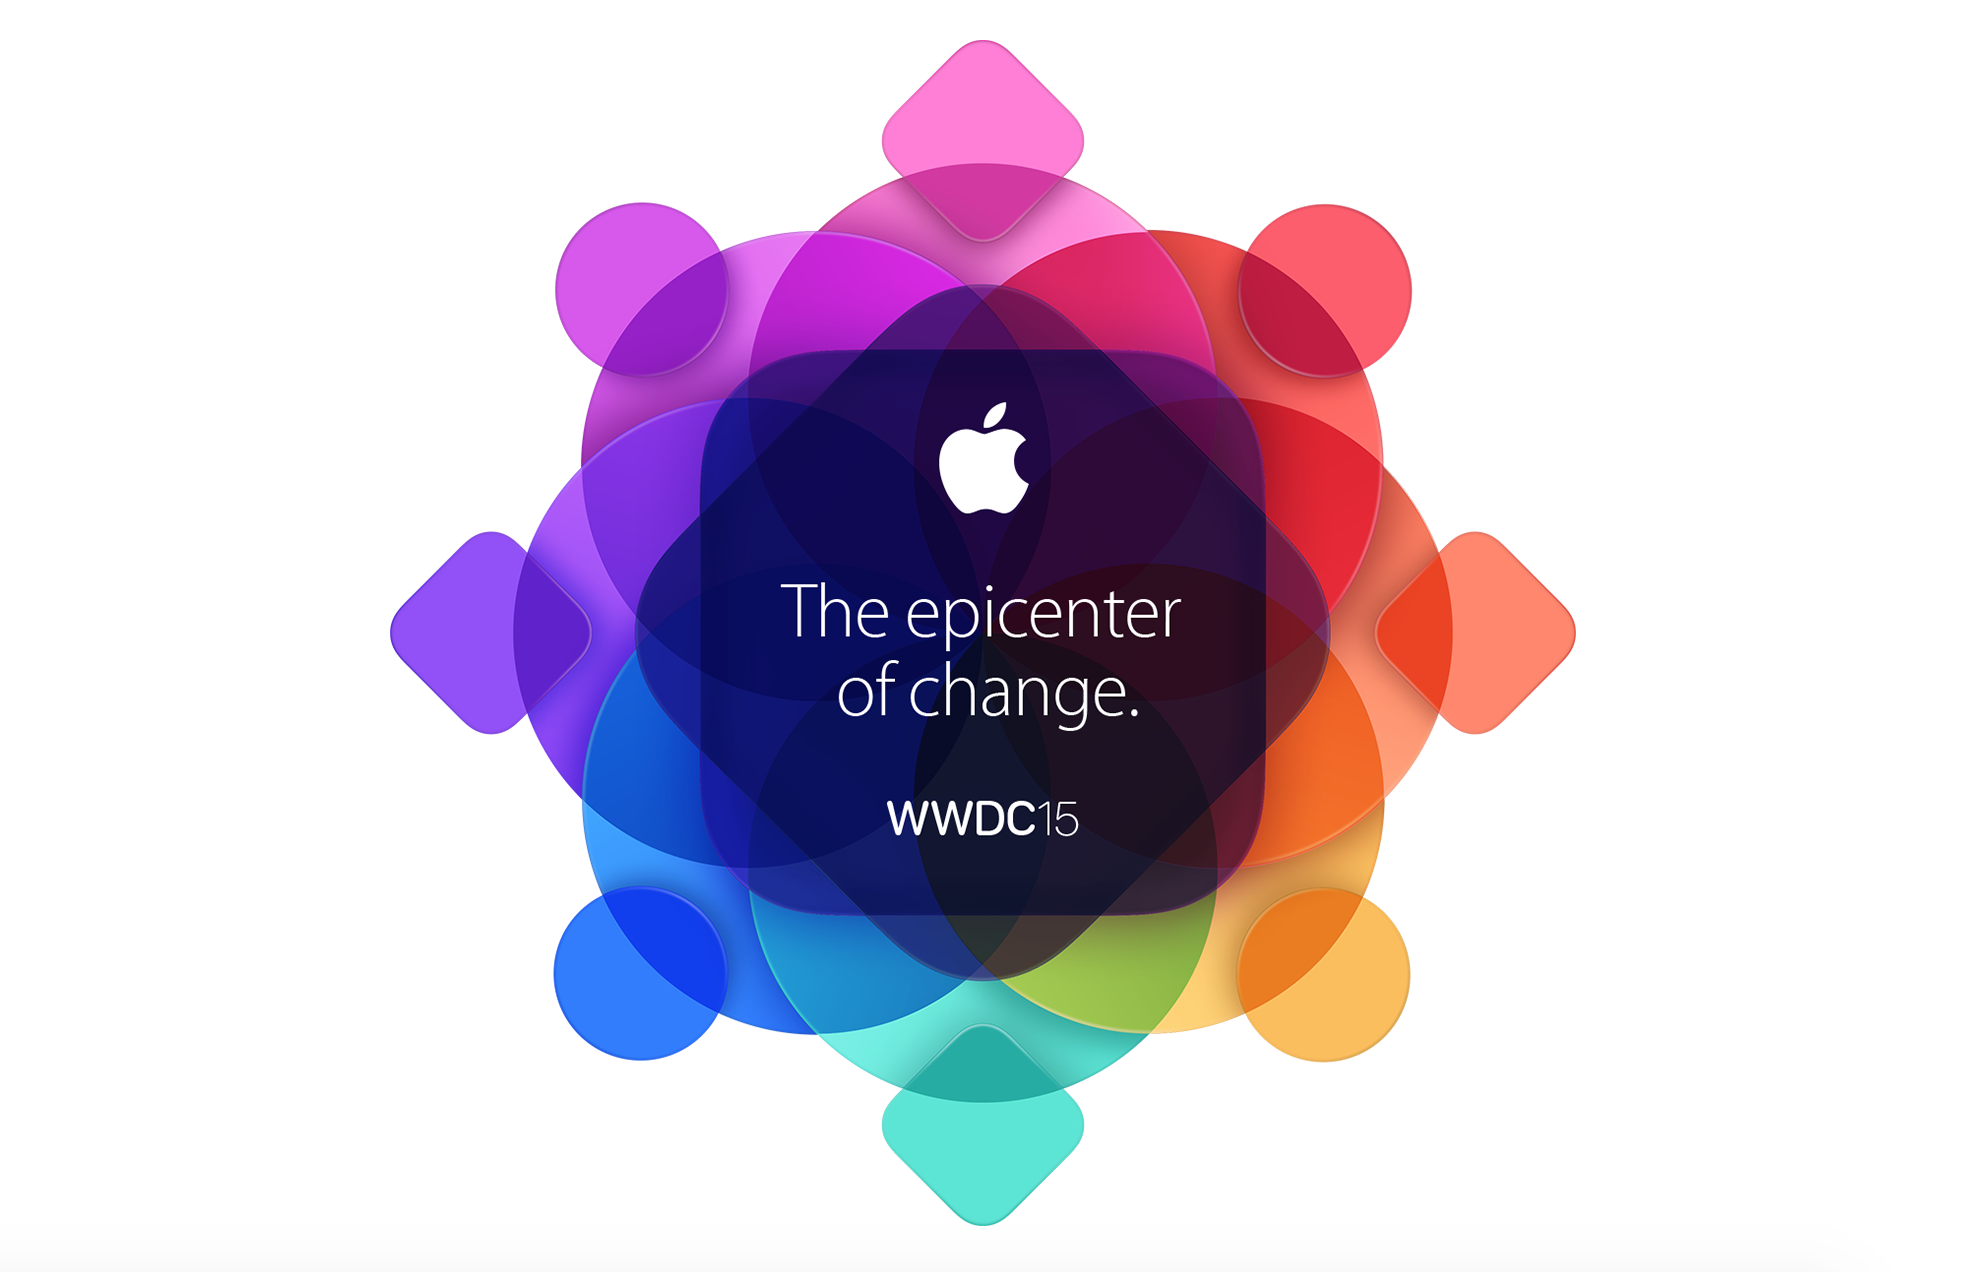 Apple begins issuing WWDC scholarships to winning applicants 9to5Mac